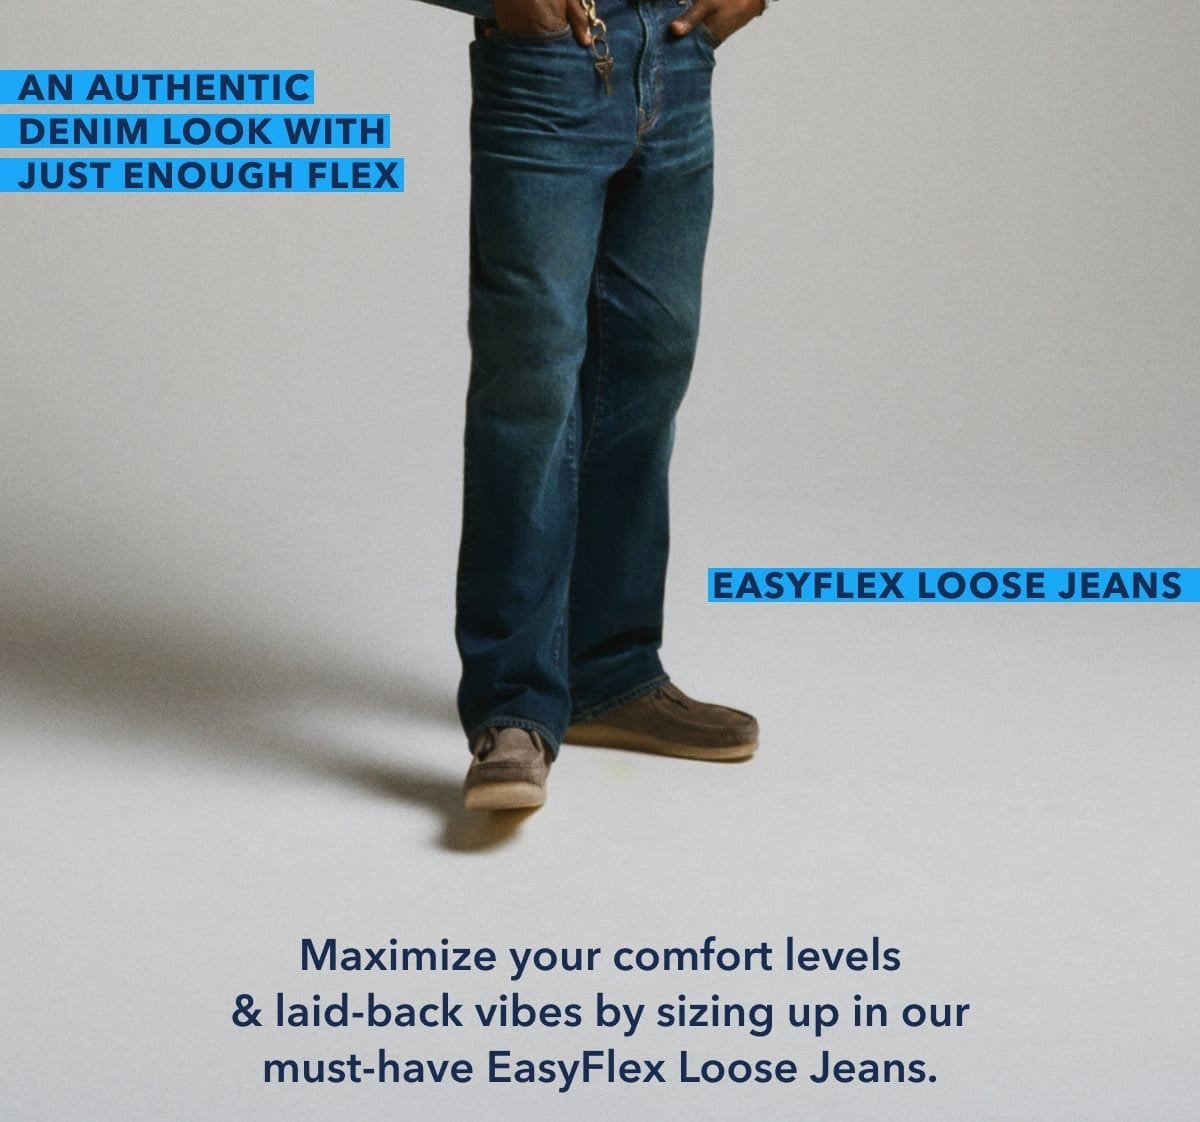 An authentic denim look with just enough flex| EasyFlex Loose Jeans